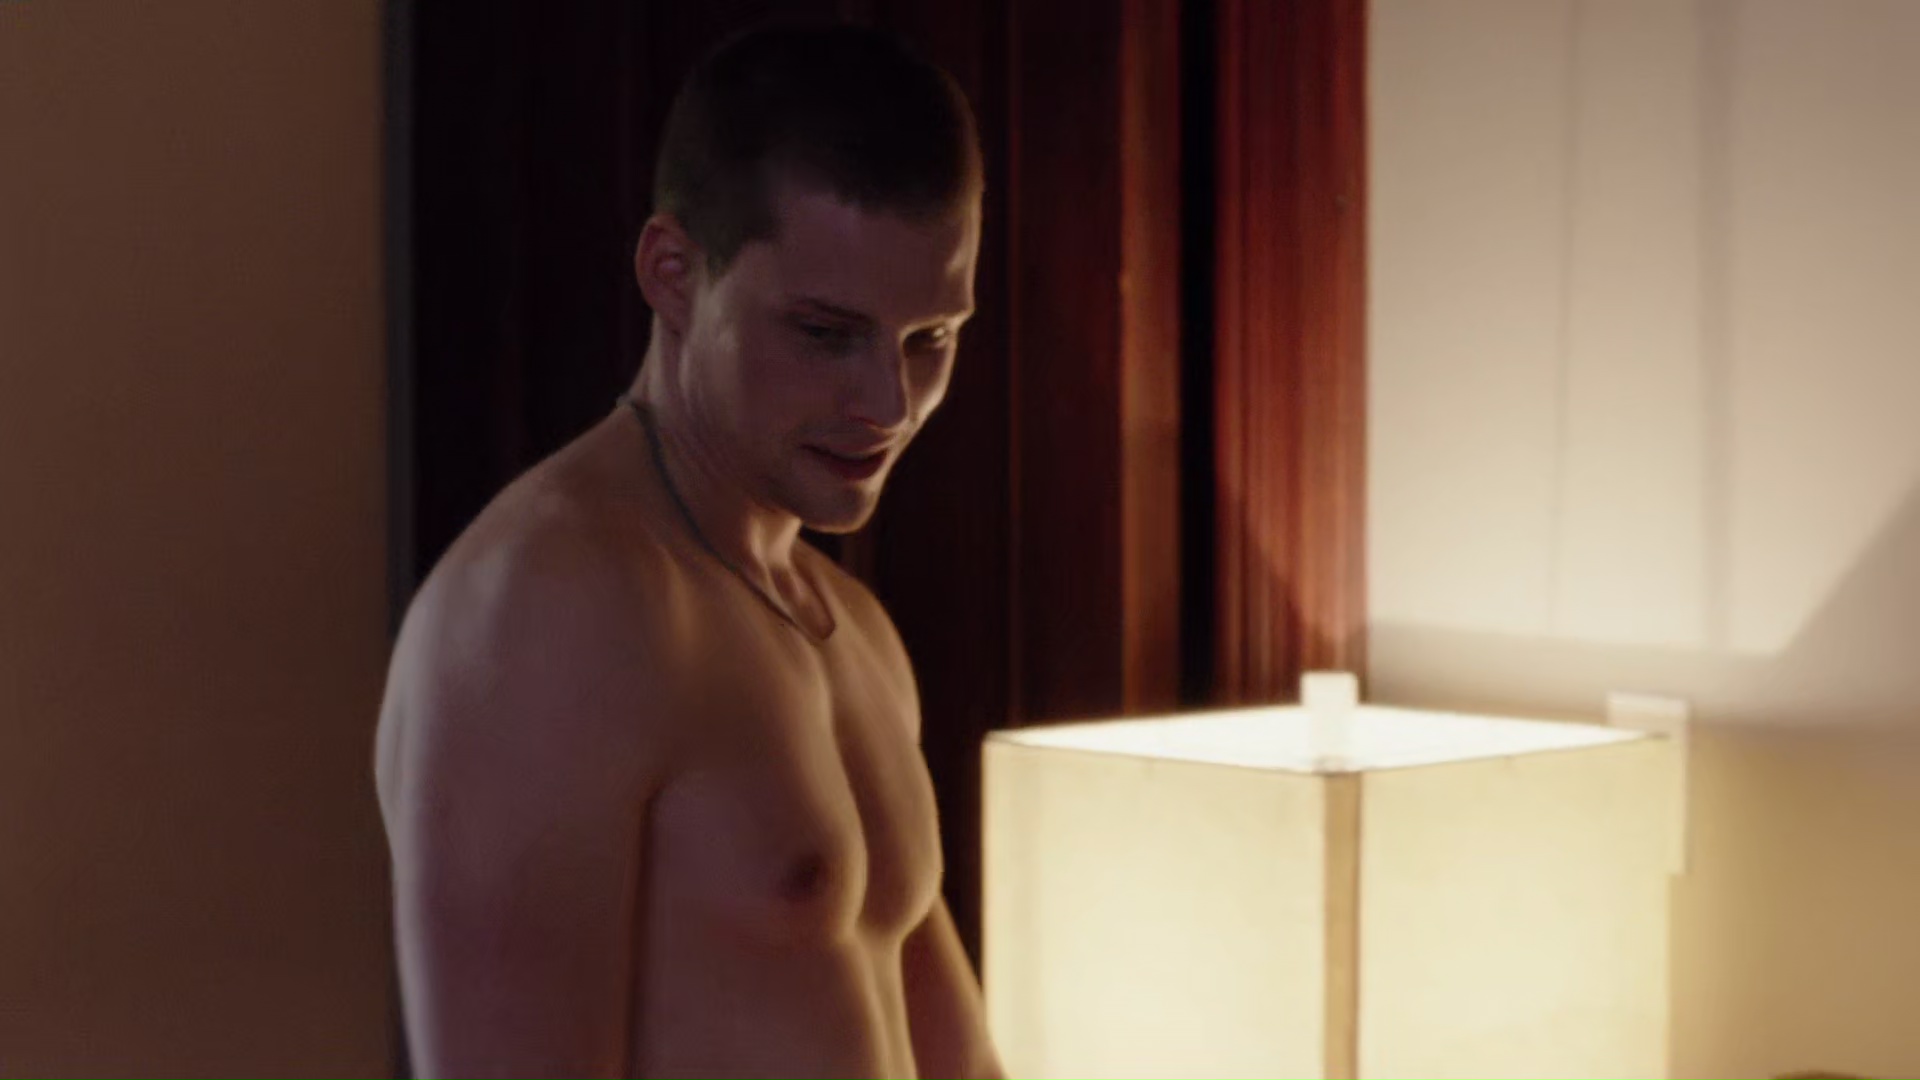 Hunter Parrish shirtless in The Following 3-04 "Home" 